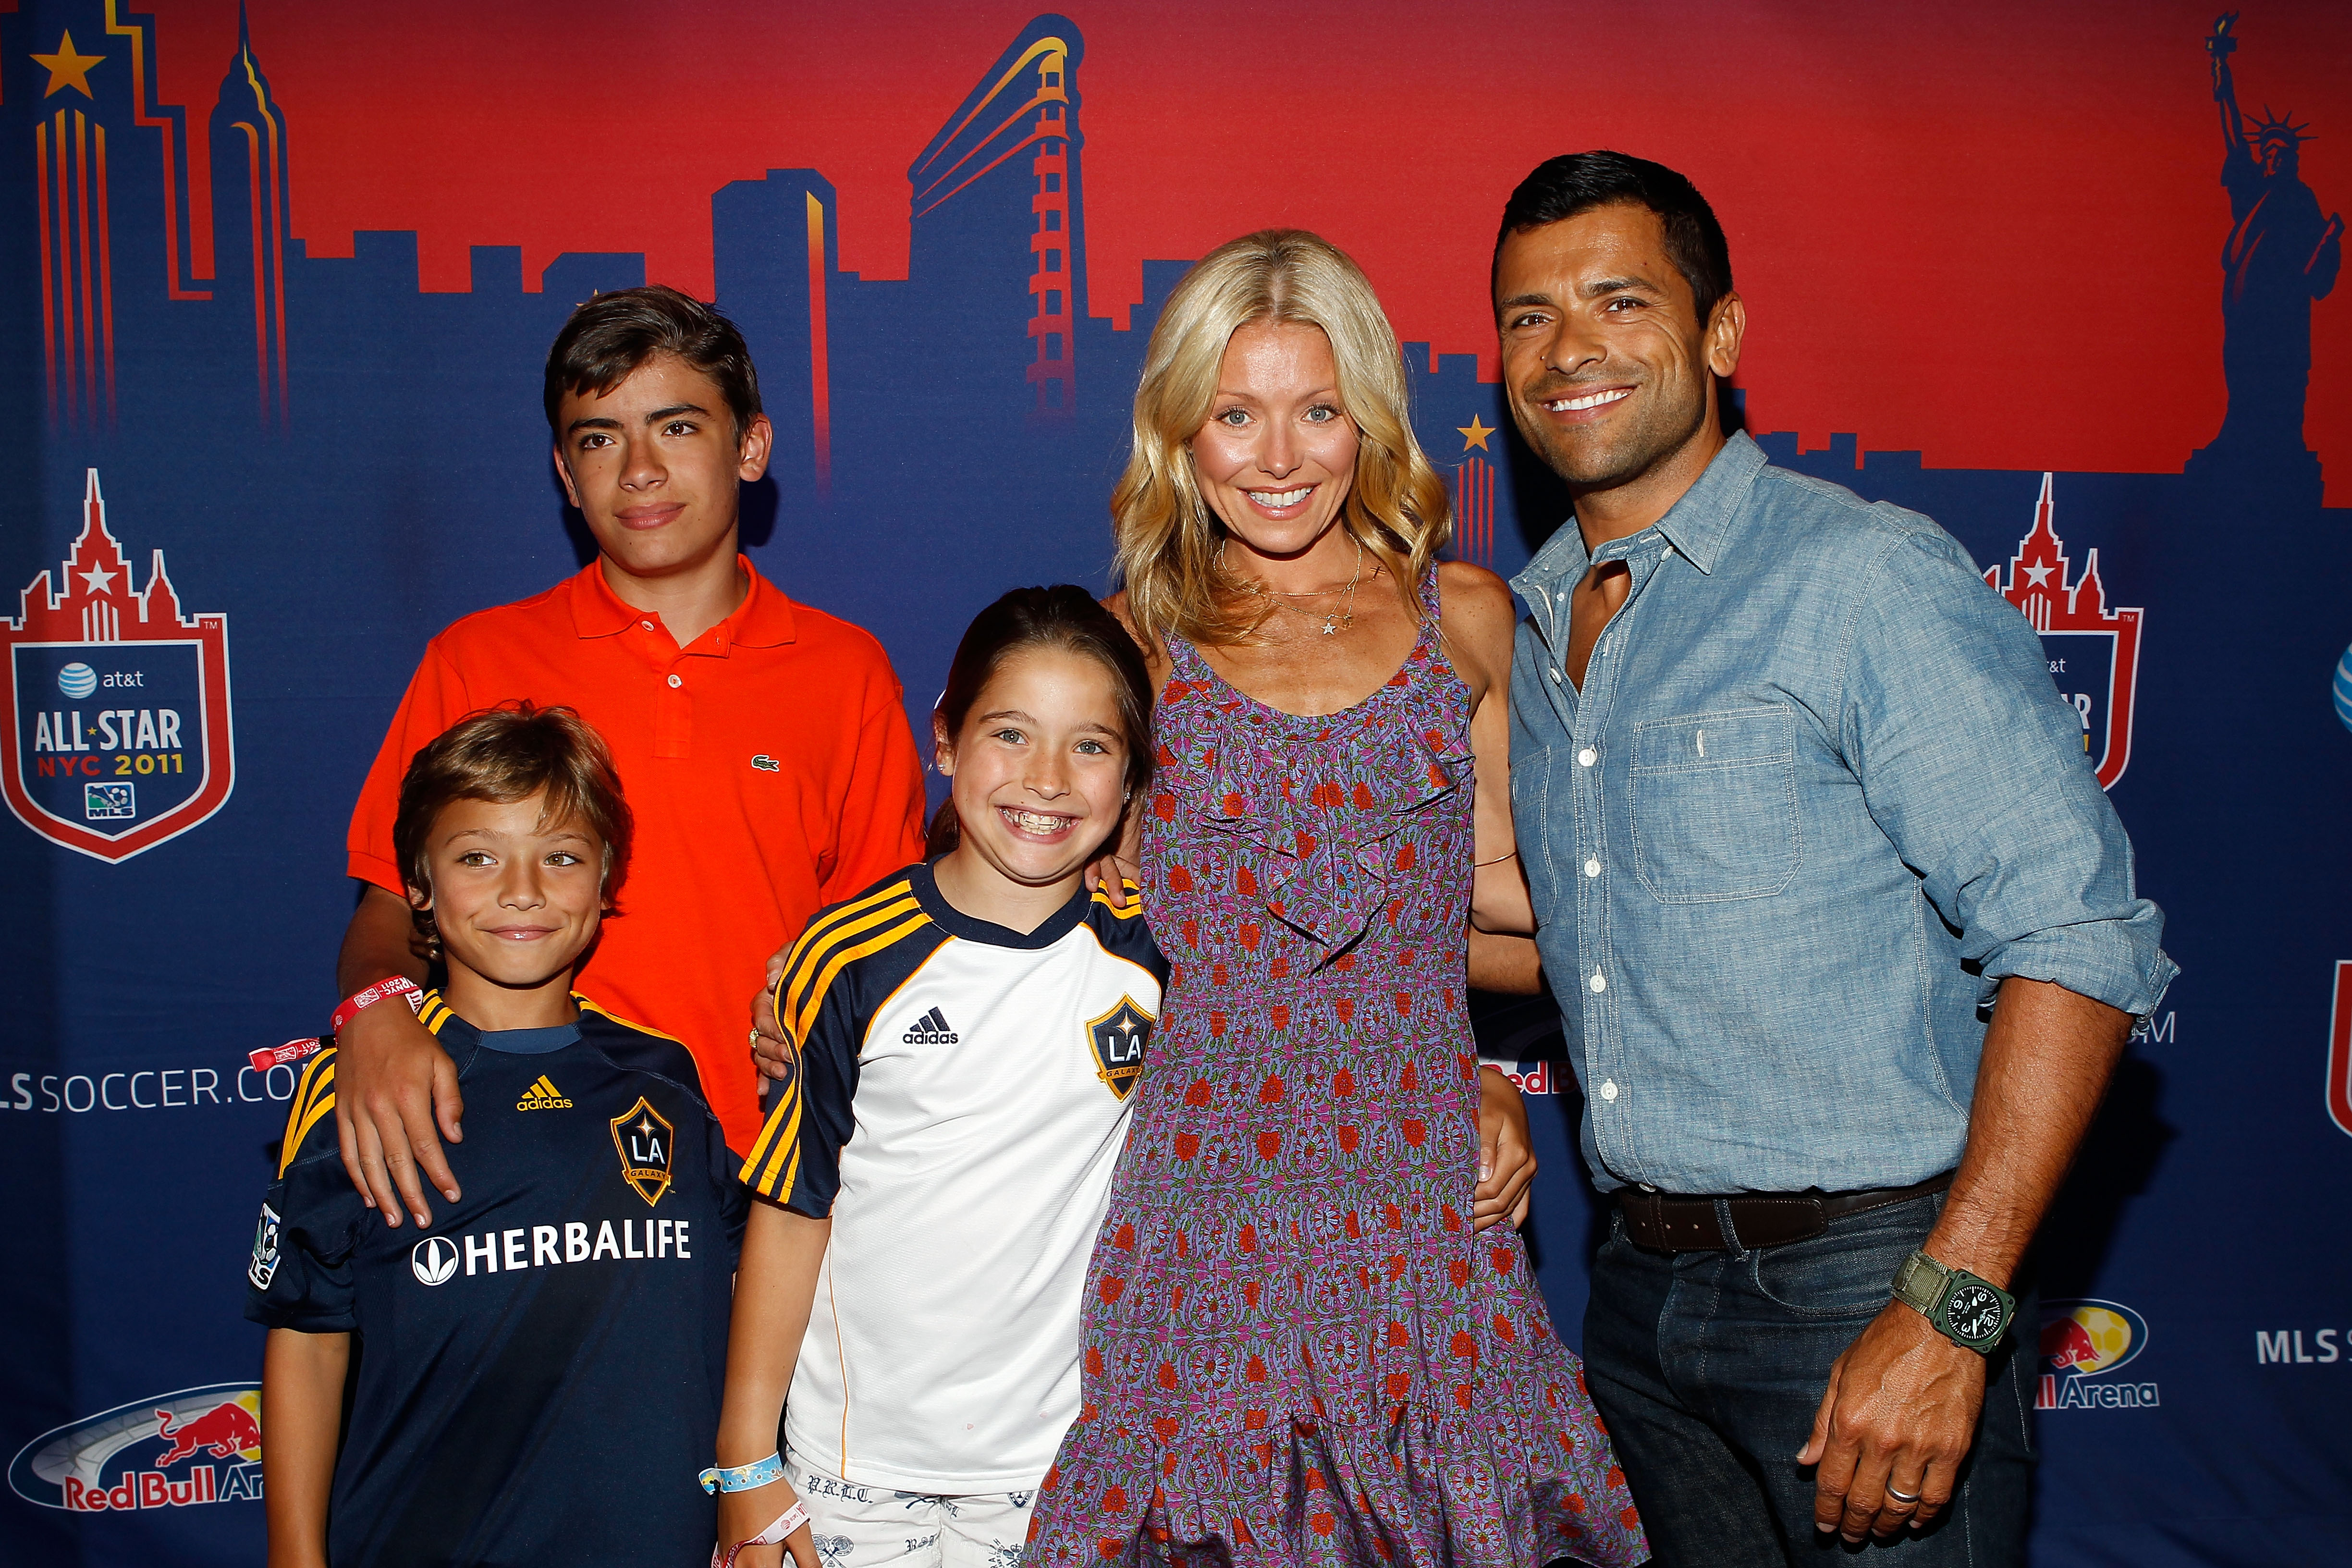 TV personality Kelly Ripa (2nd R), her husband Mark Consuelos (R) and their kids smiles for a photo prior to the MLS All-Star Game at Red Bull Arena on July 27, 2011 in Harrison, New Jersey | Source: Getty Images